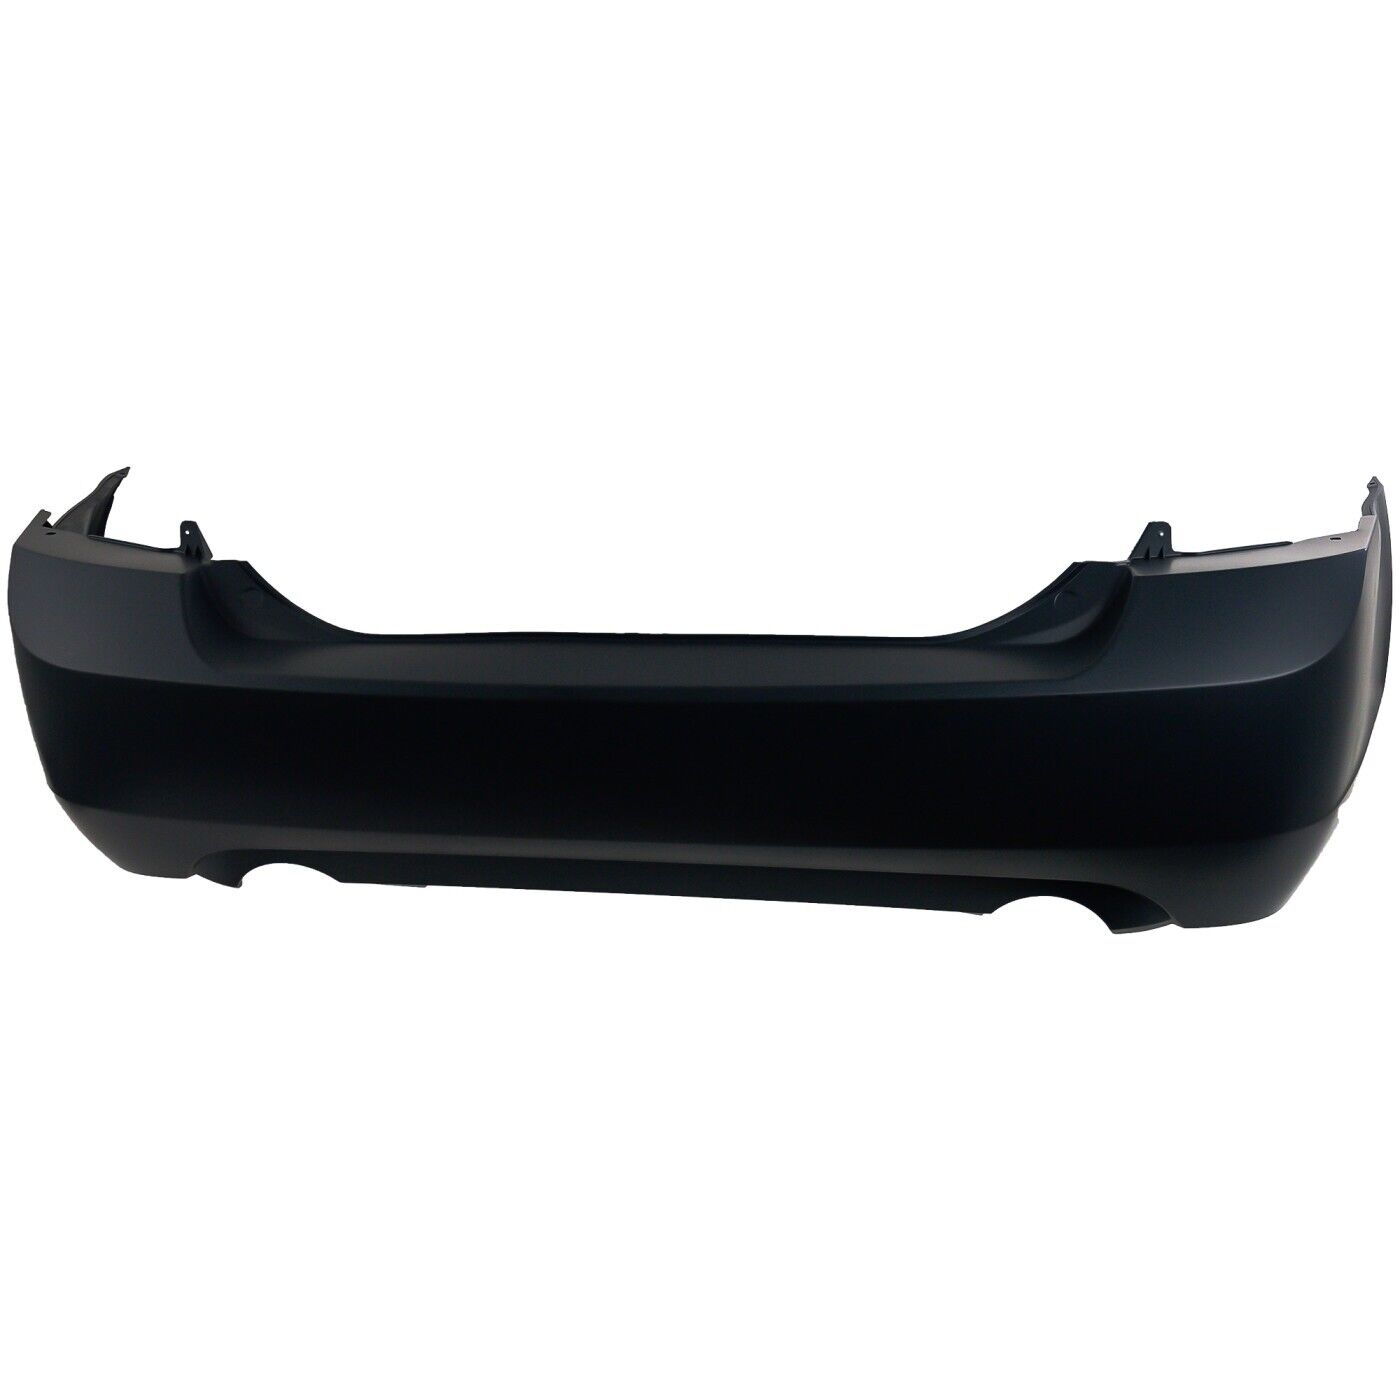 Rear Bumper Cover For 2006-2009 Ford Fusion w/ Dual Exhaust Holes Primed